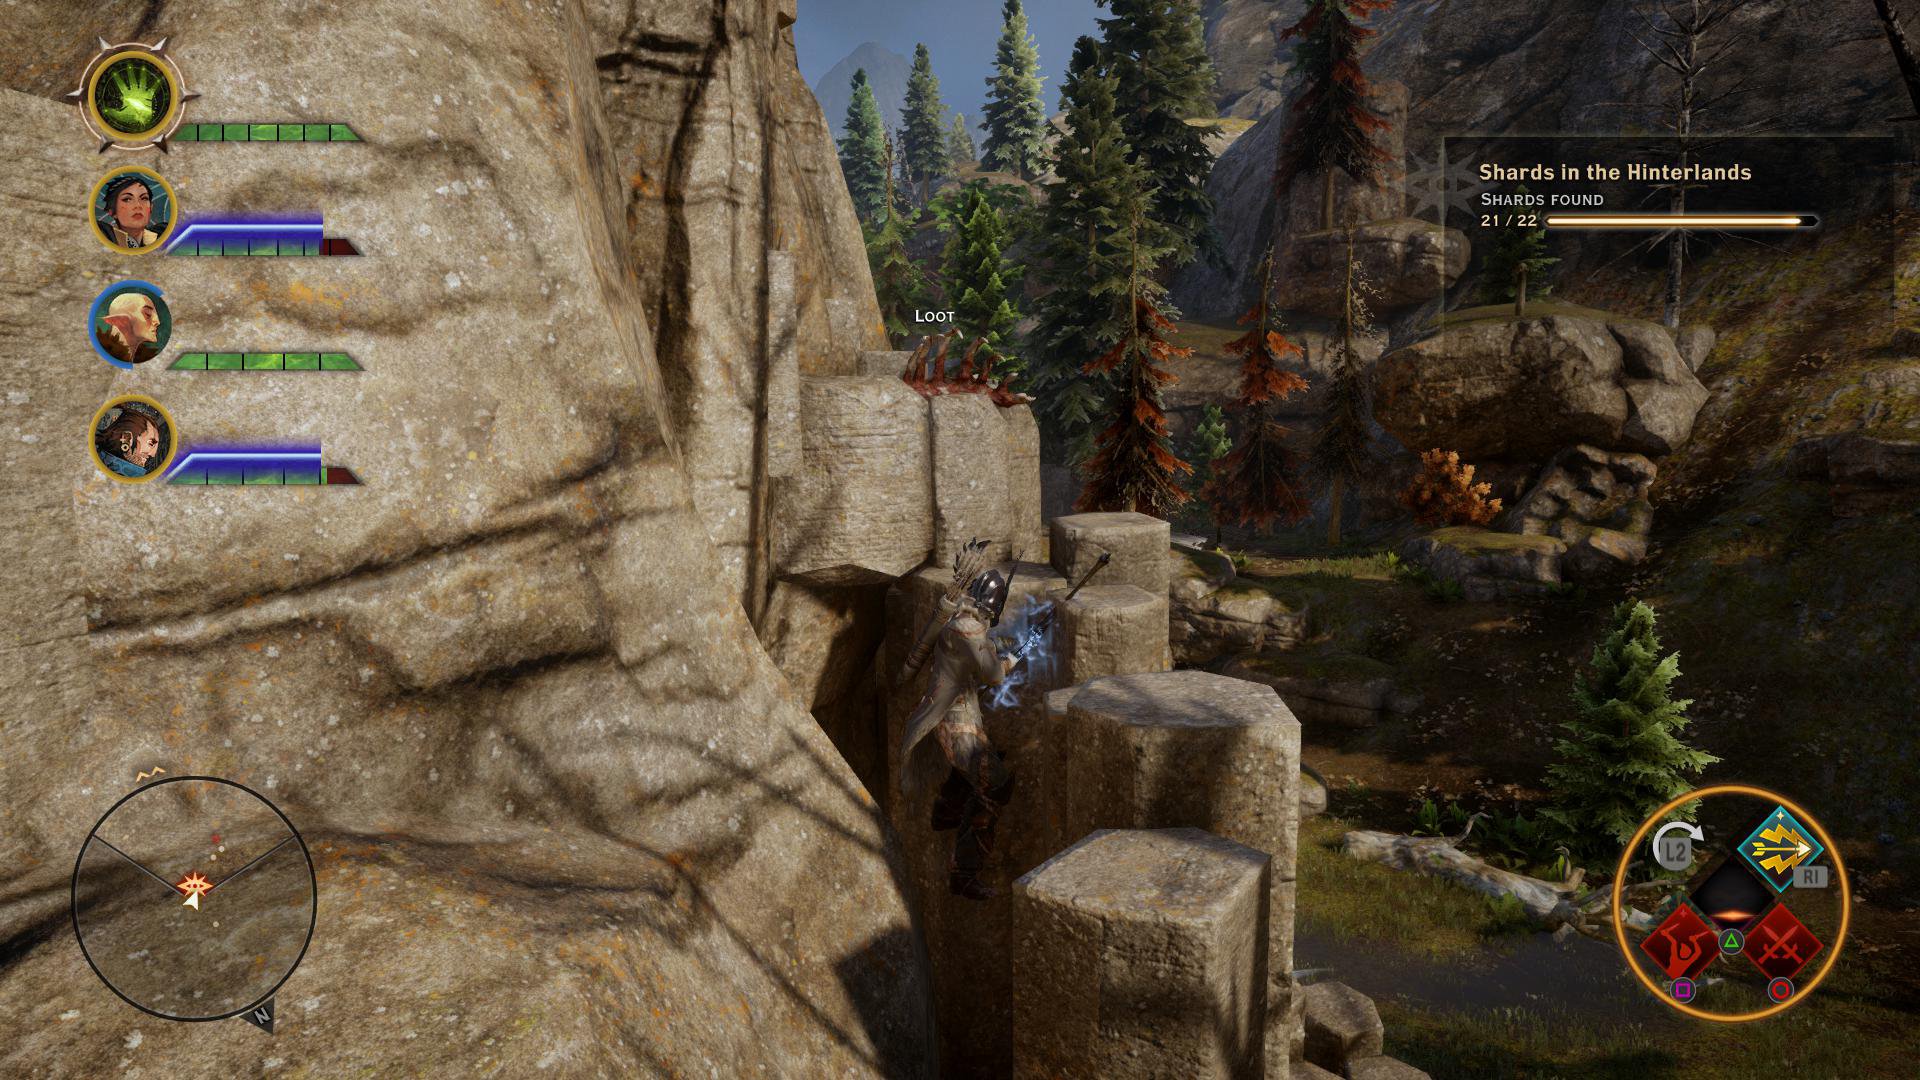 Dragon Age Inquisition - tactical mode, jumping glitch fix